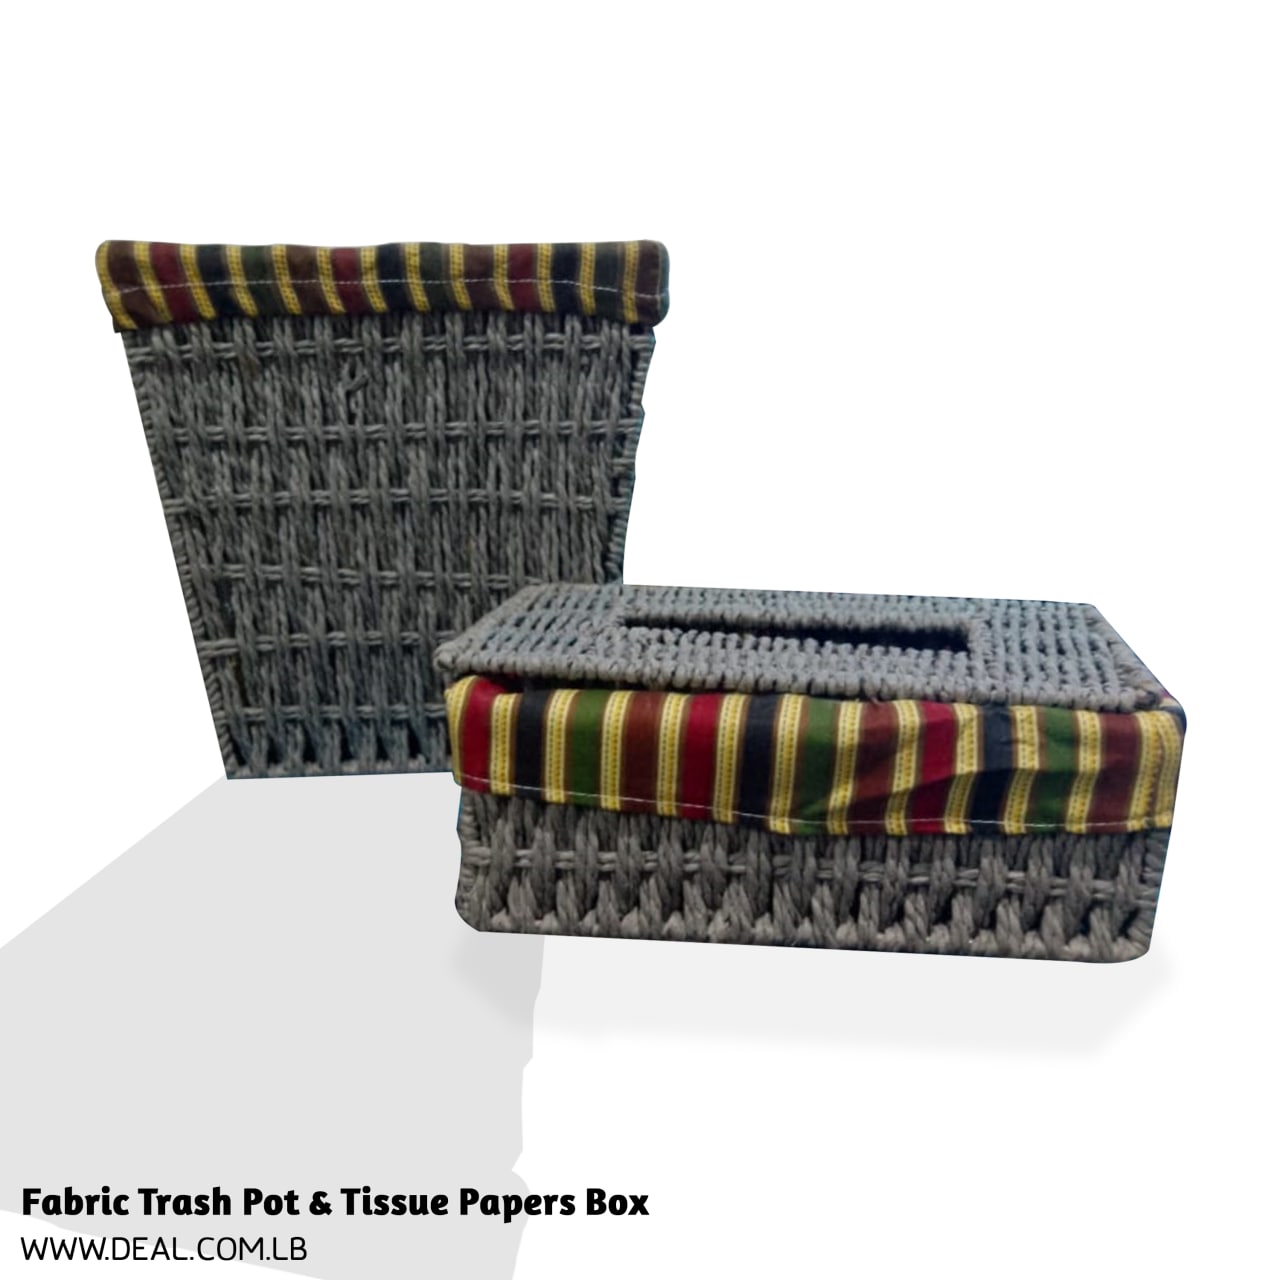 Fabric Trash Pot & Tissue Papers Box red